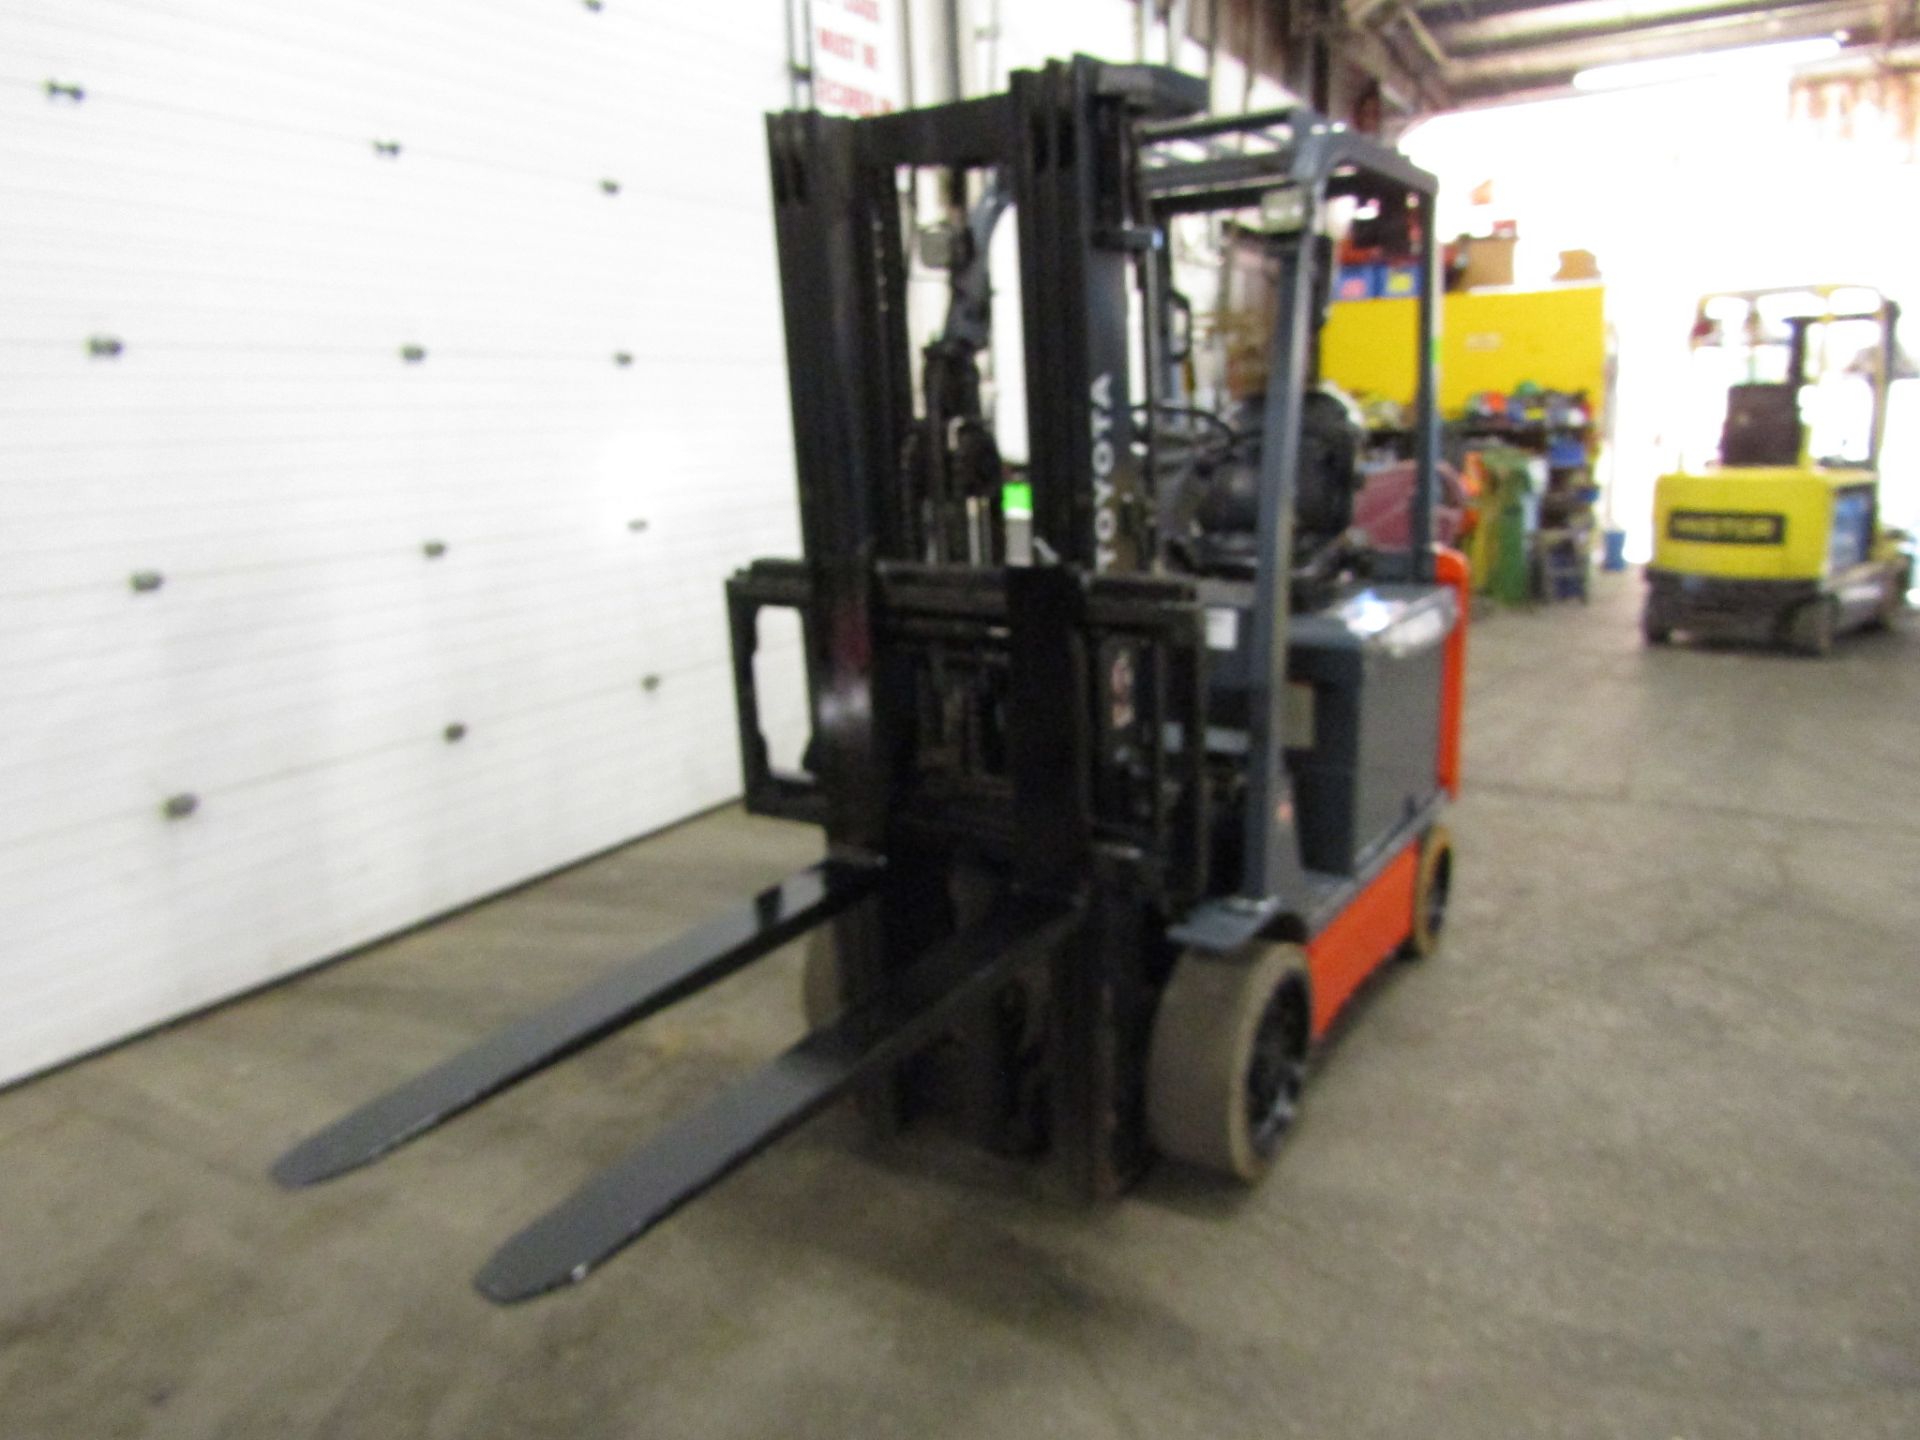 FREE CUSTOMS DOCS & 0 DUTY FEES - Toyota 5500lbs Electric Forklift with sideshift and 3-stage mast - Image 2 of 2